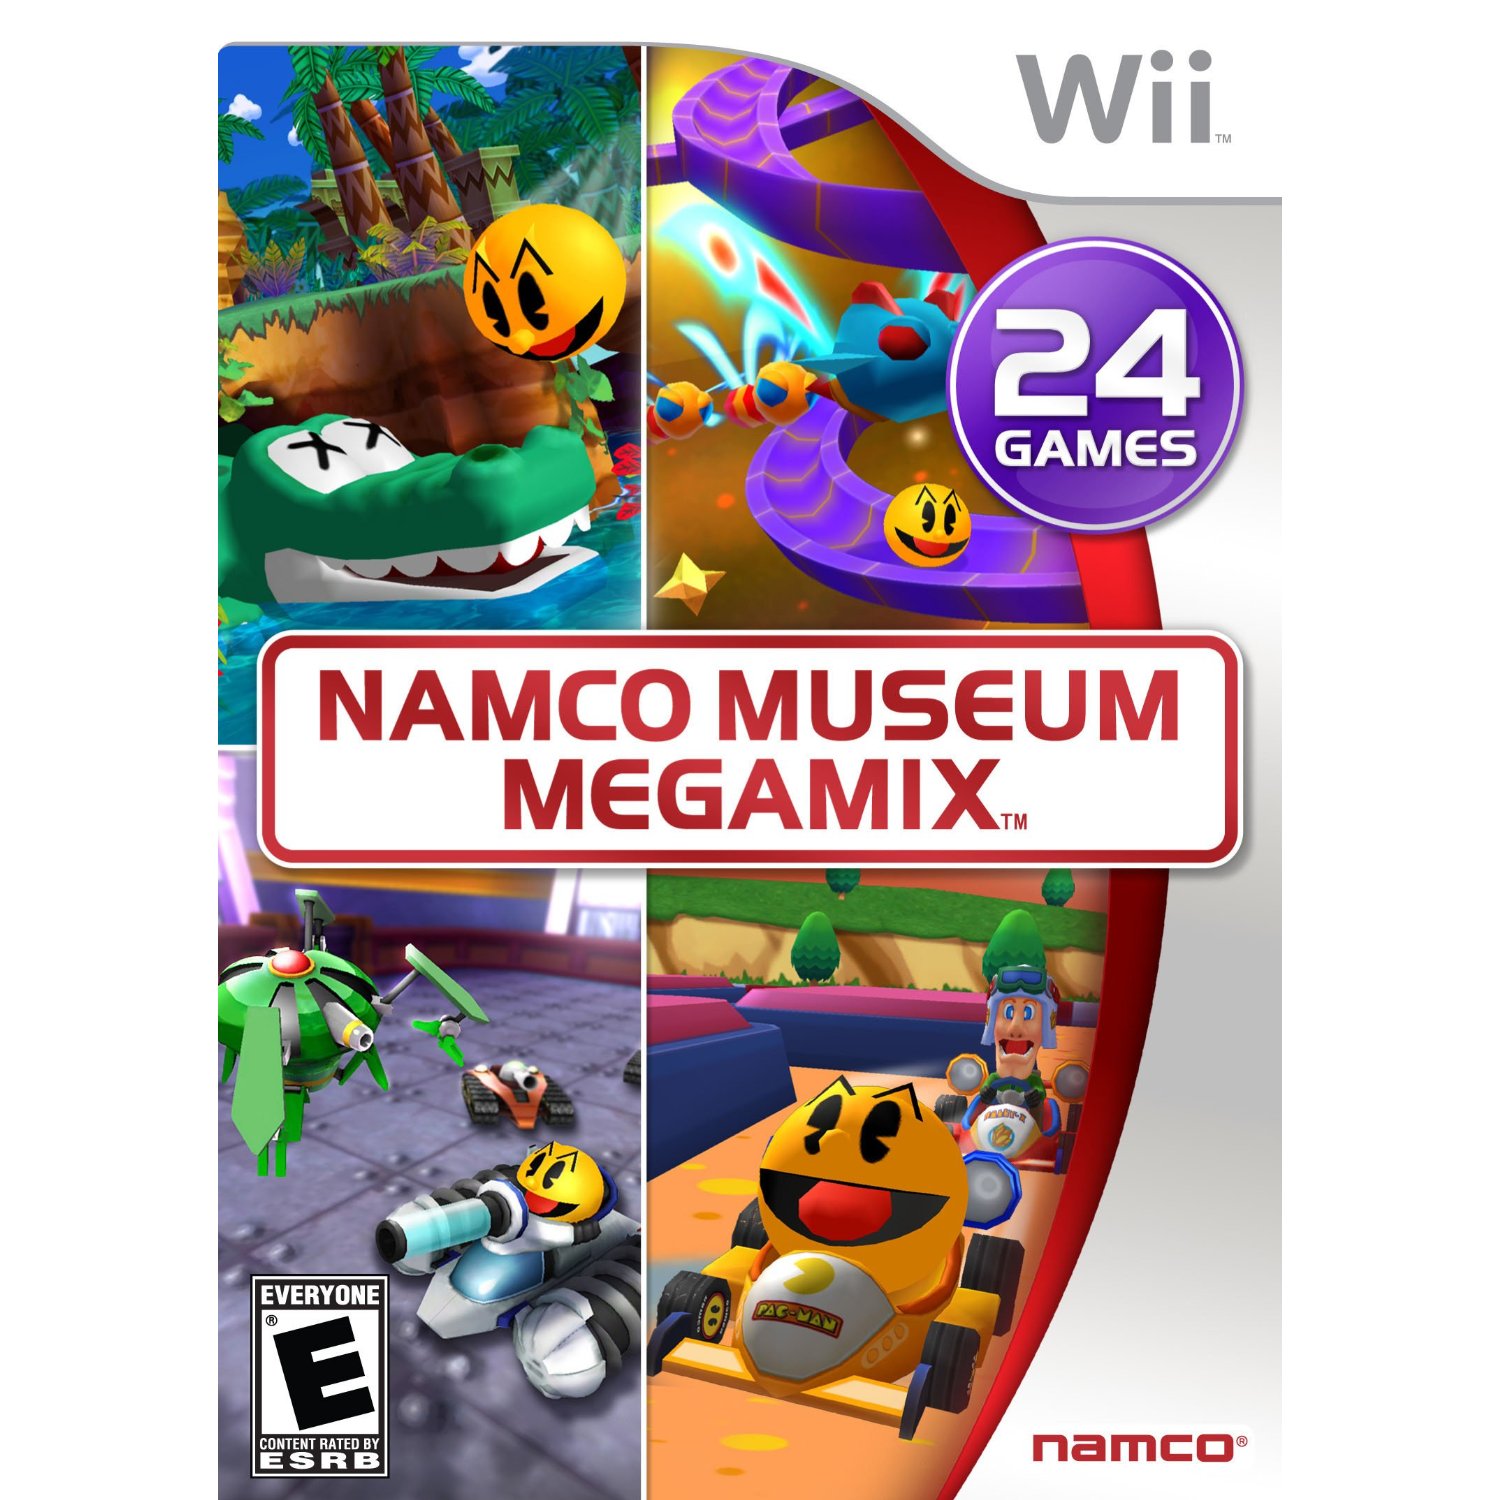 Namco Museum Pics, Video Game Collection